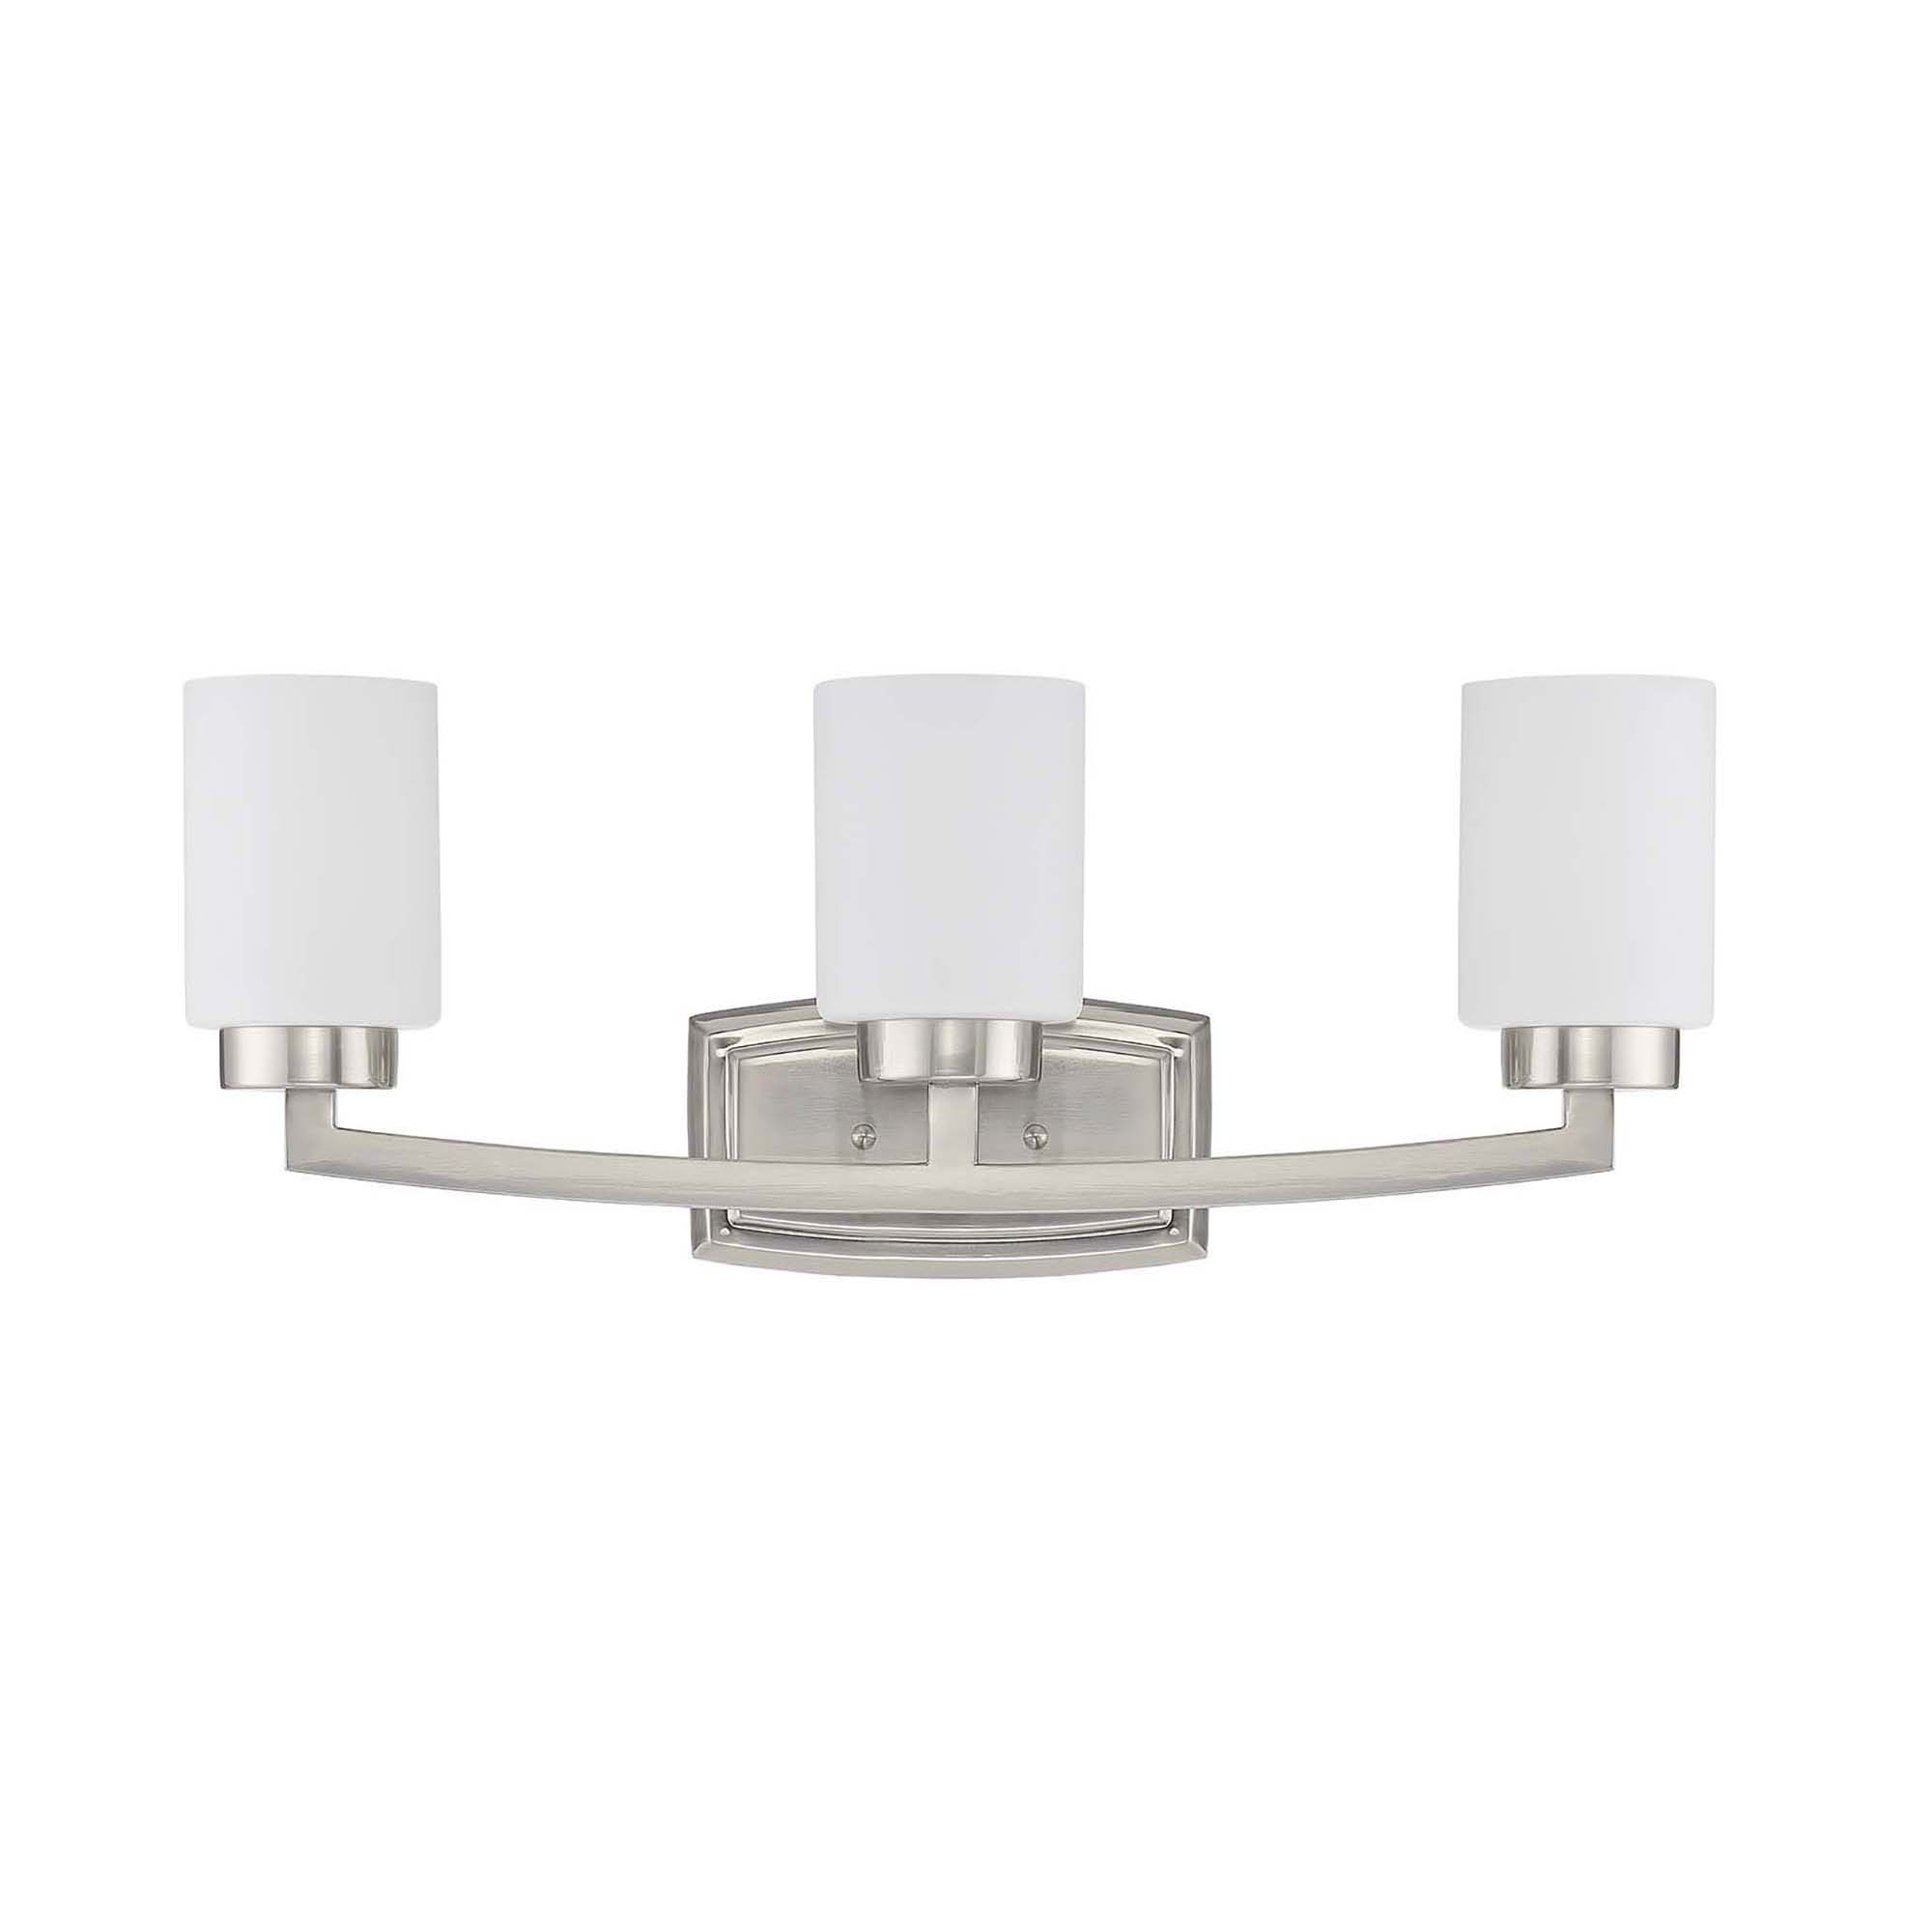 Sunset Lighting Three Light Hadley Vanity - Opal Glass Dimmable - with Bright Satin Nickel Finish